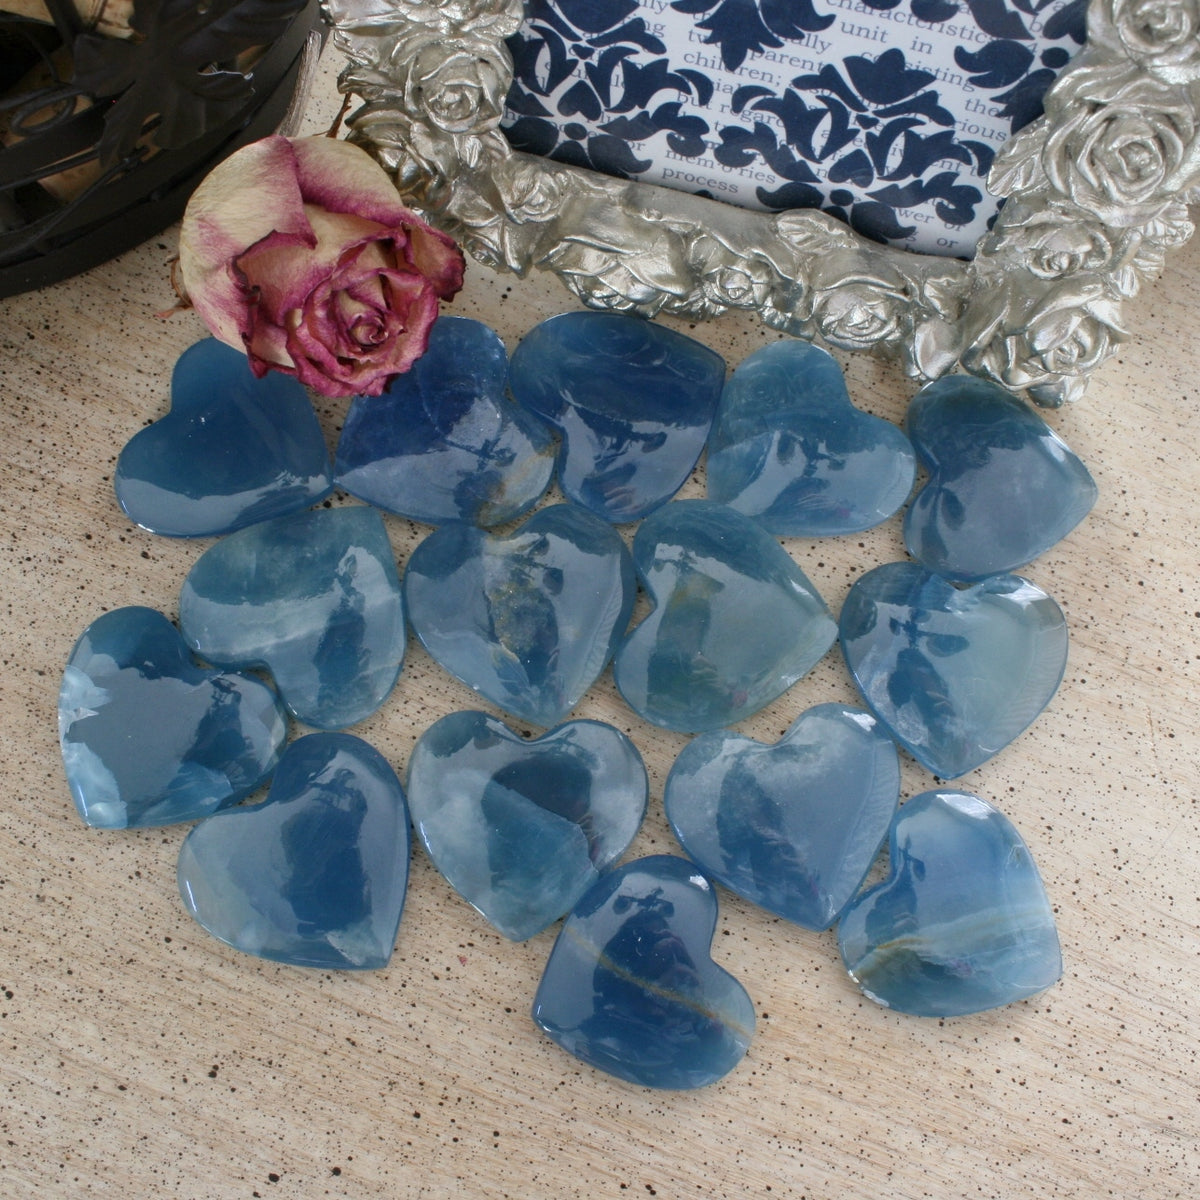 Blue Calcite Heart from Argentina, also called Blue Onyx or Lemurian Aquatine Calcite, LGH4